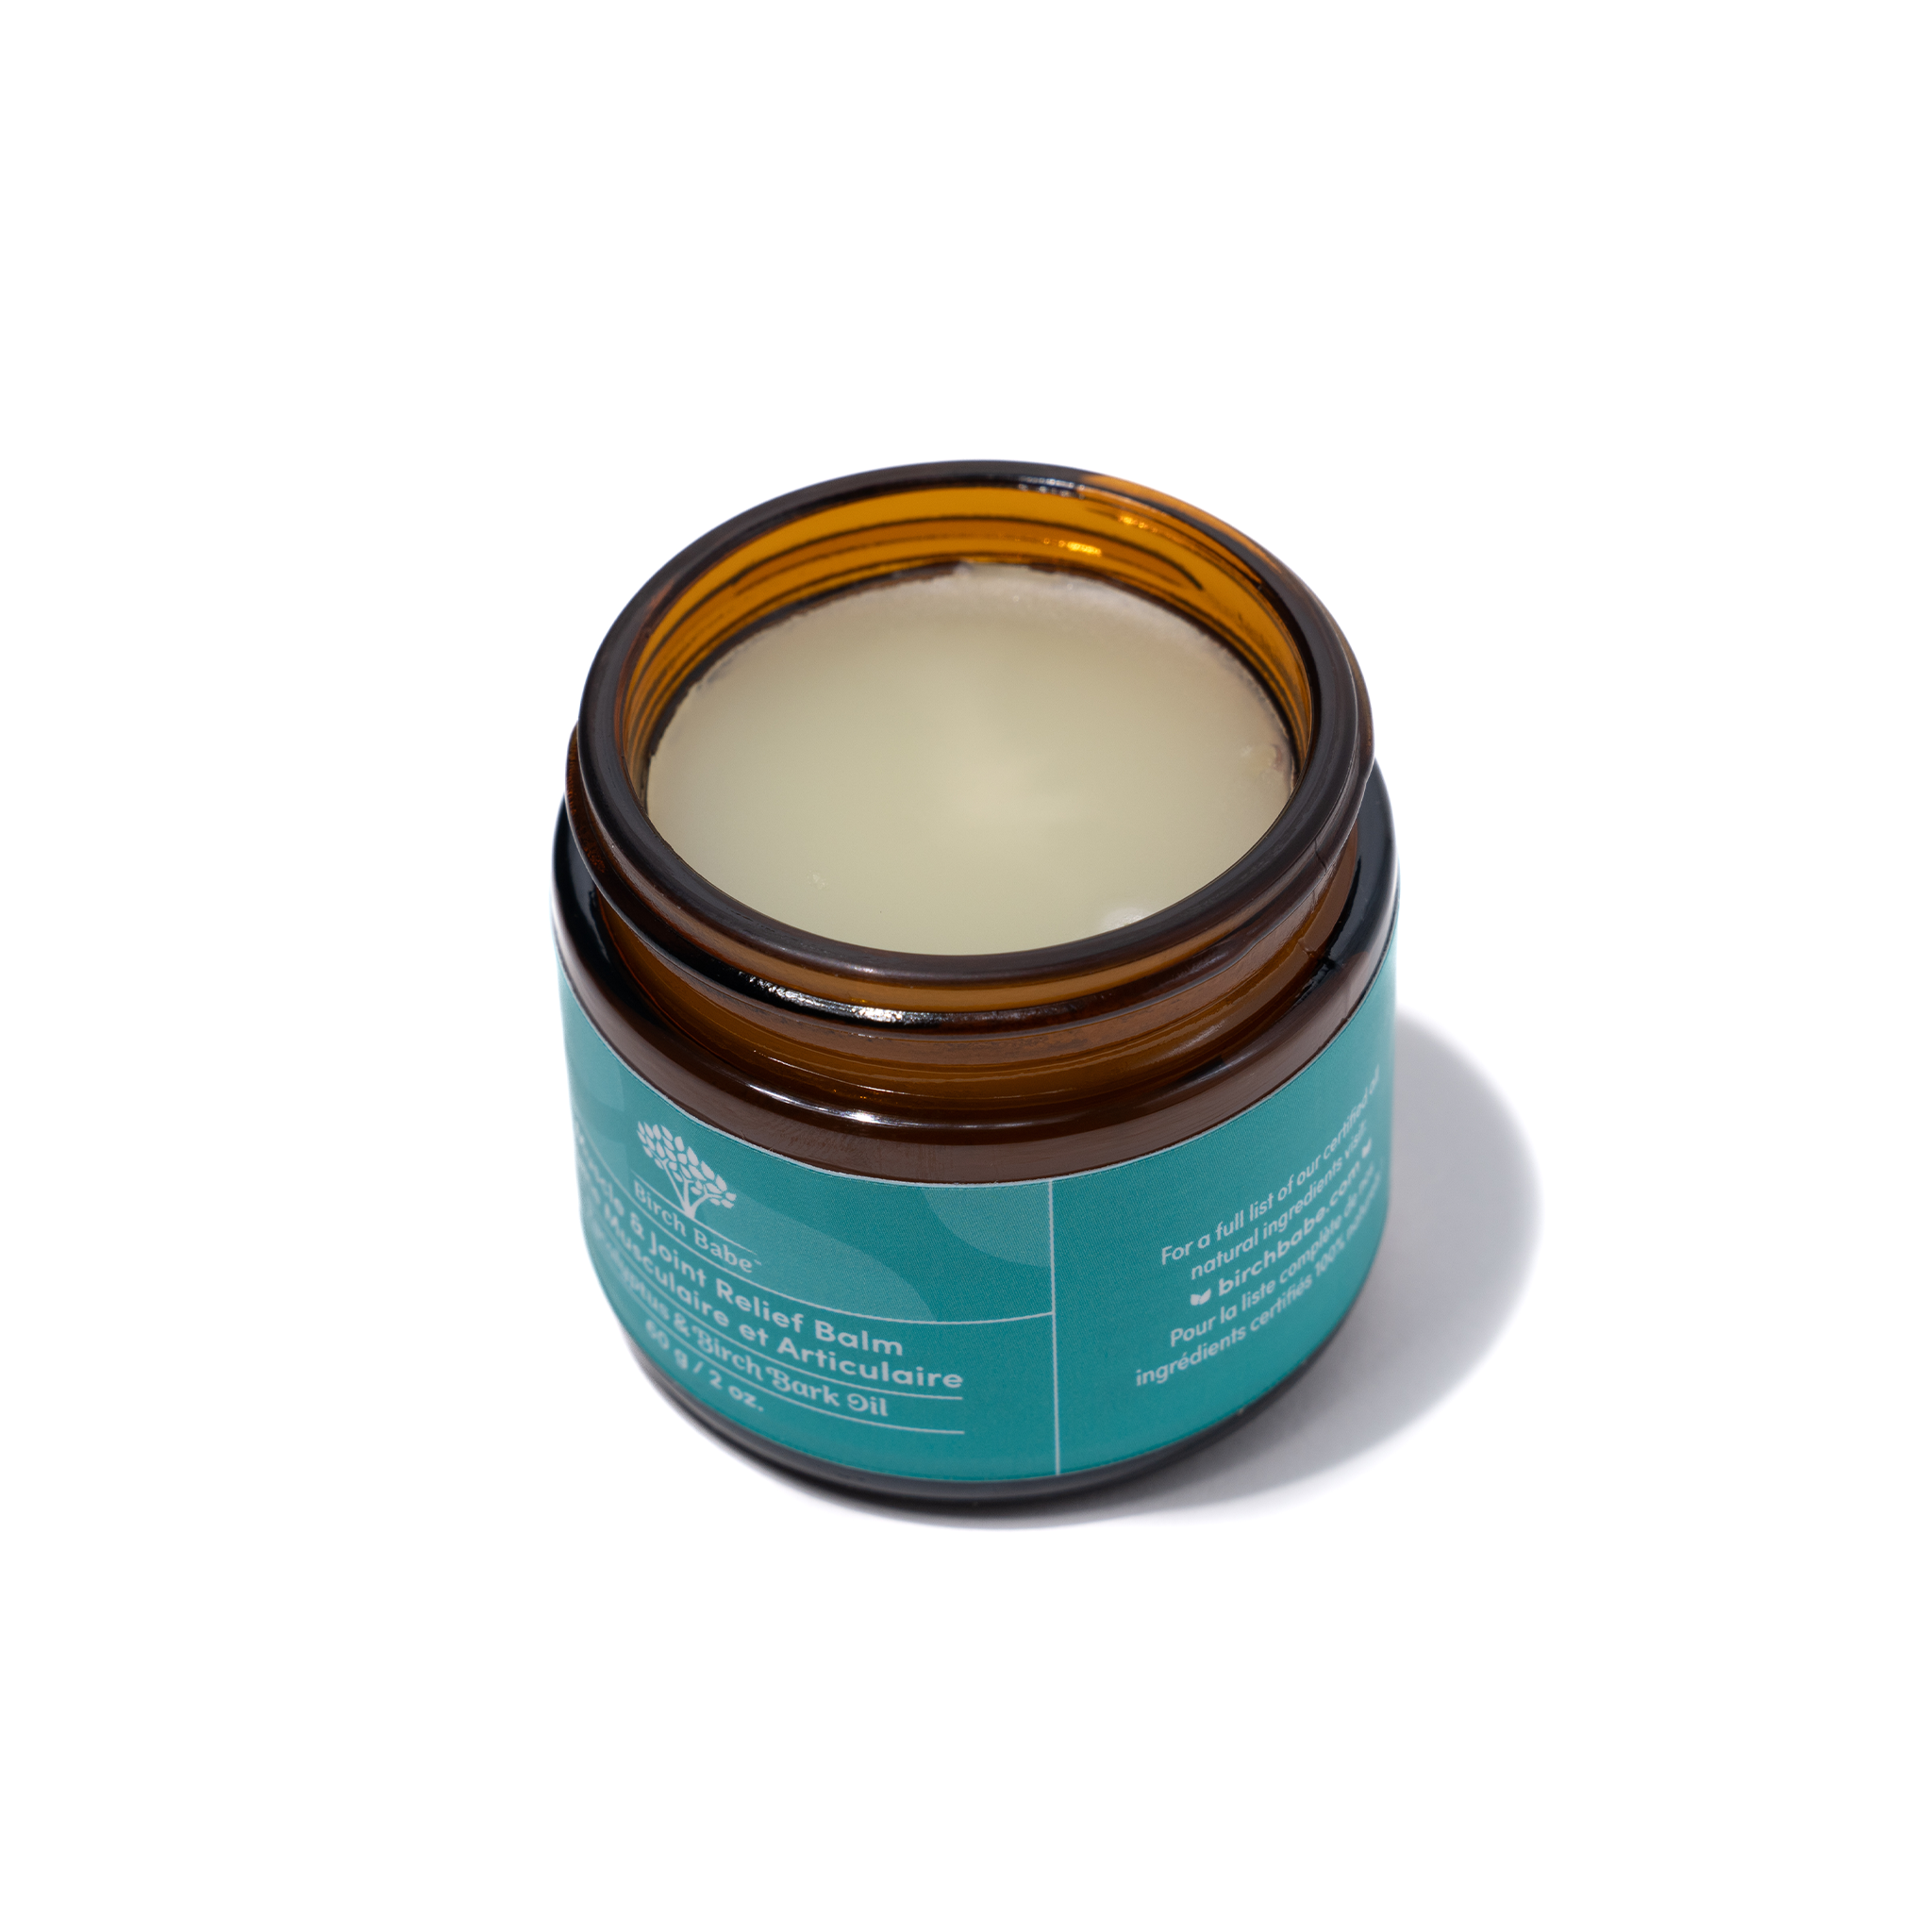 Muscle & Joint Relief Balm